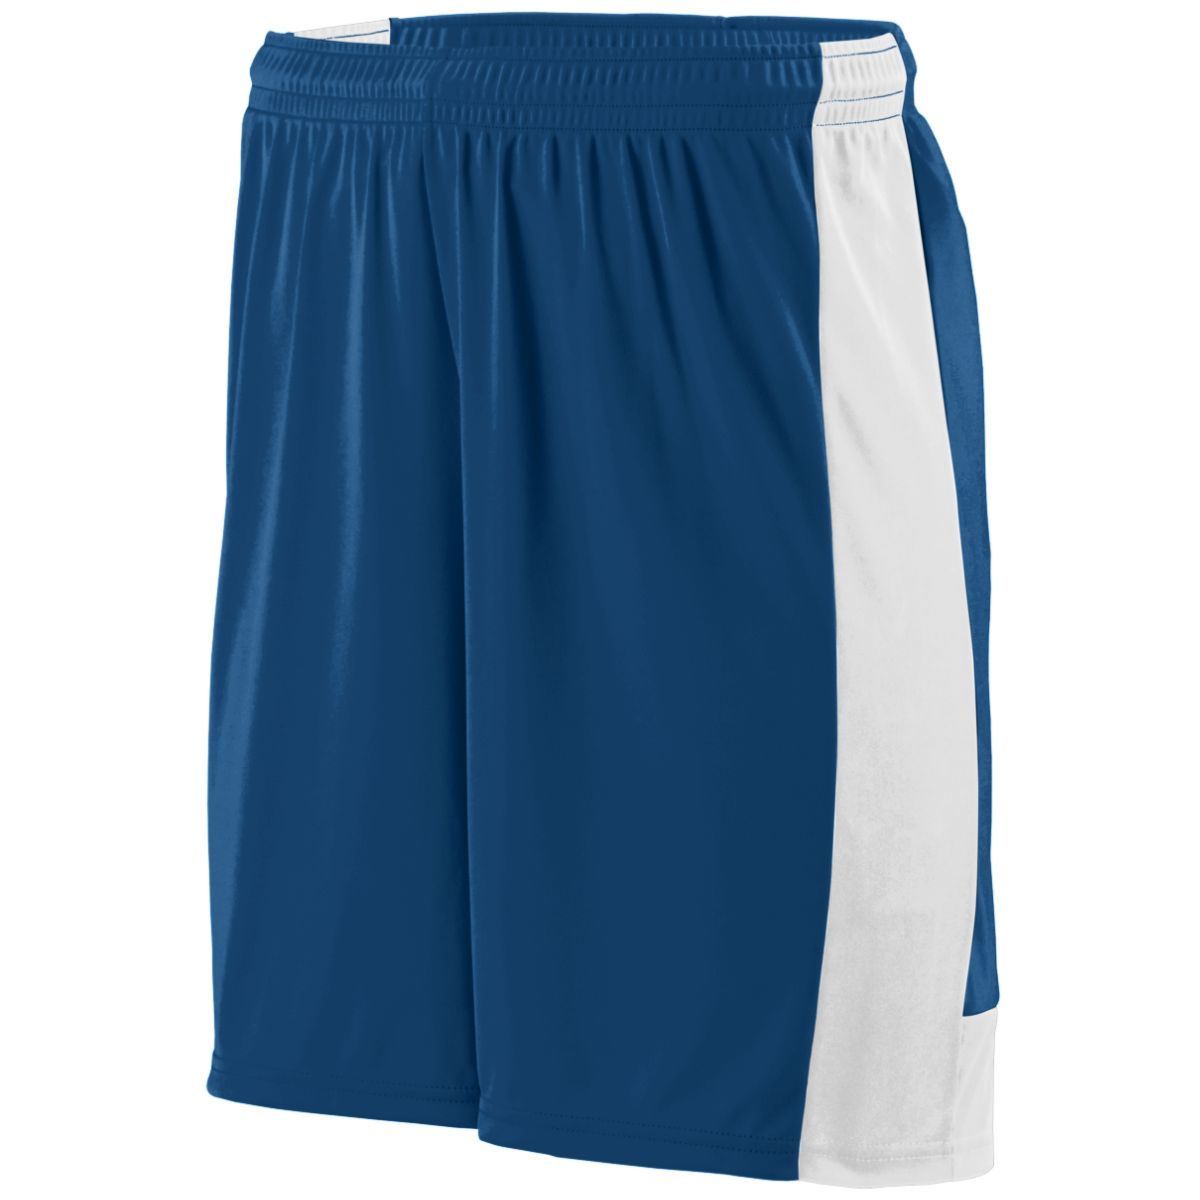 Augusta Sportswear Youth Lightning Shorts in Navy/White  -Part of the Youth, Youth-Shorts, Augusta-Products, Soccer, All-Sports-1 product lines at KanaleyCreations.com